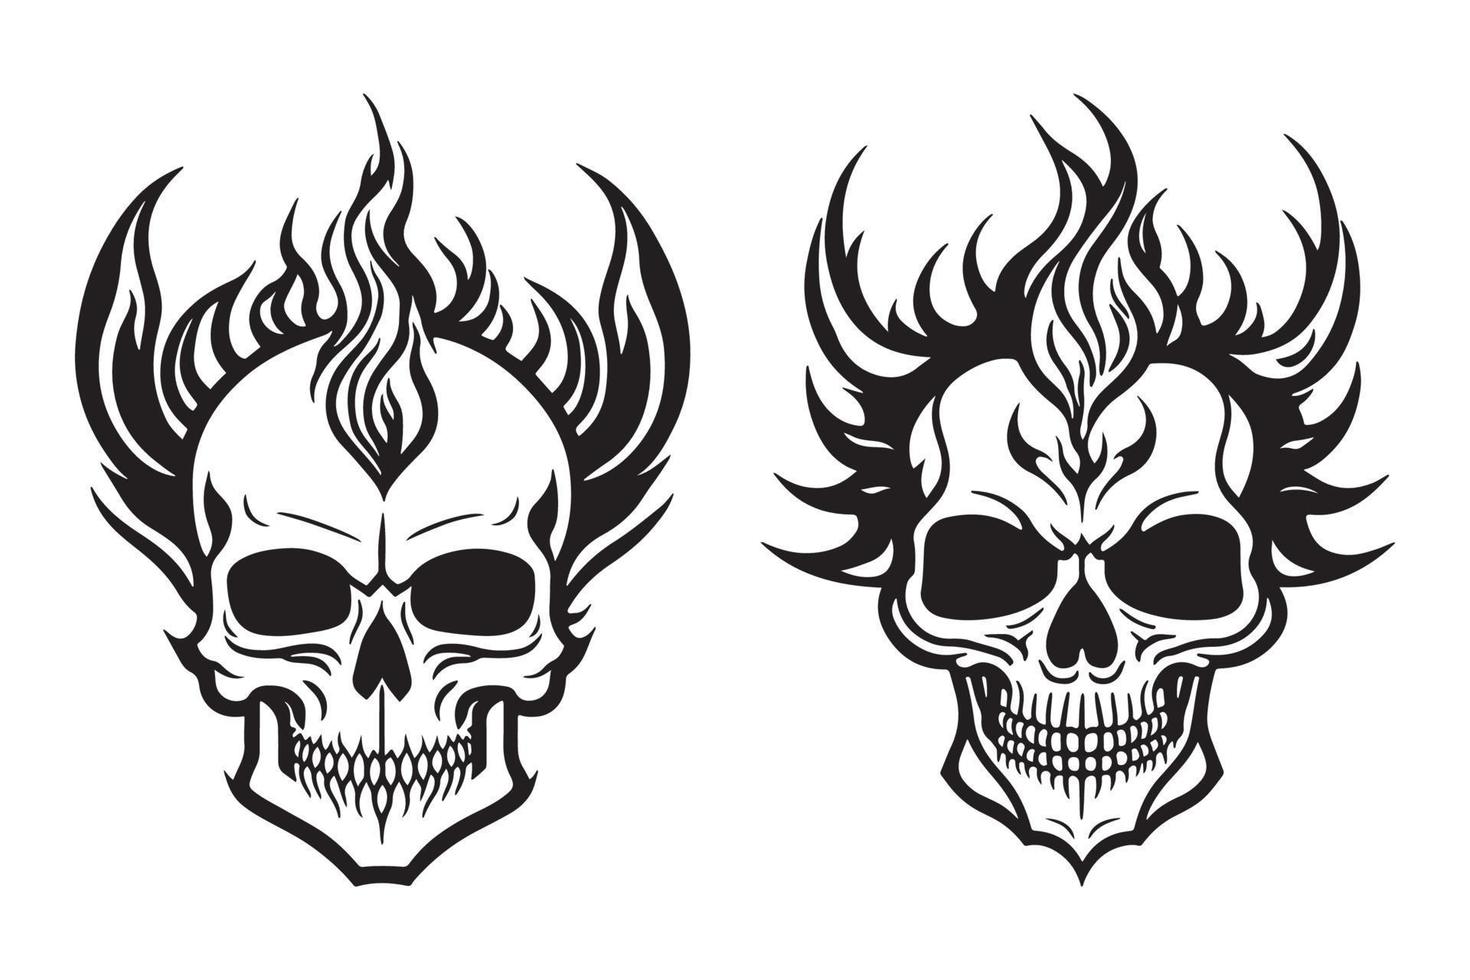 Skull with fire and smoke effect simple tattoo design black outline vector on white background